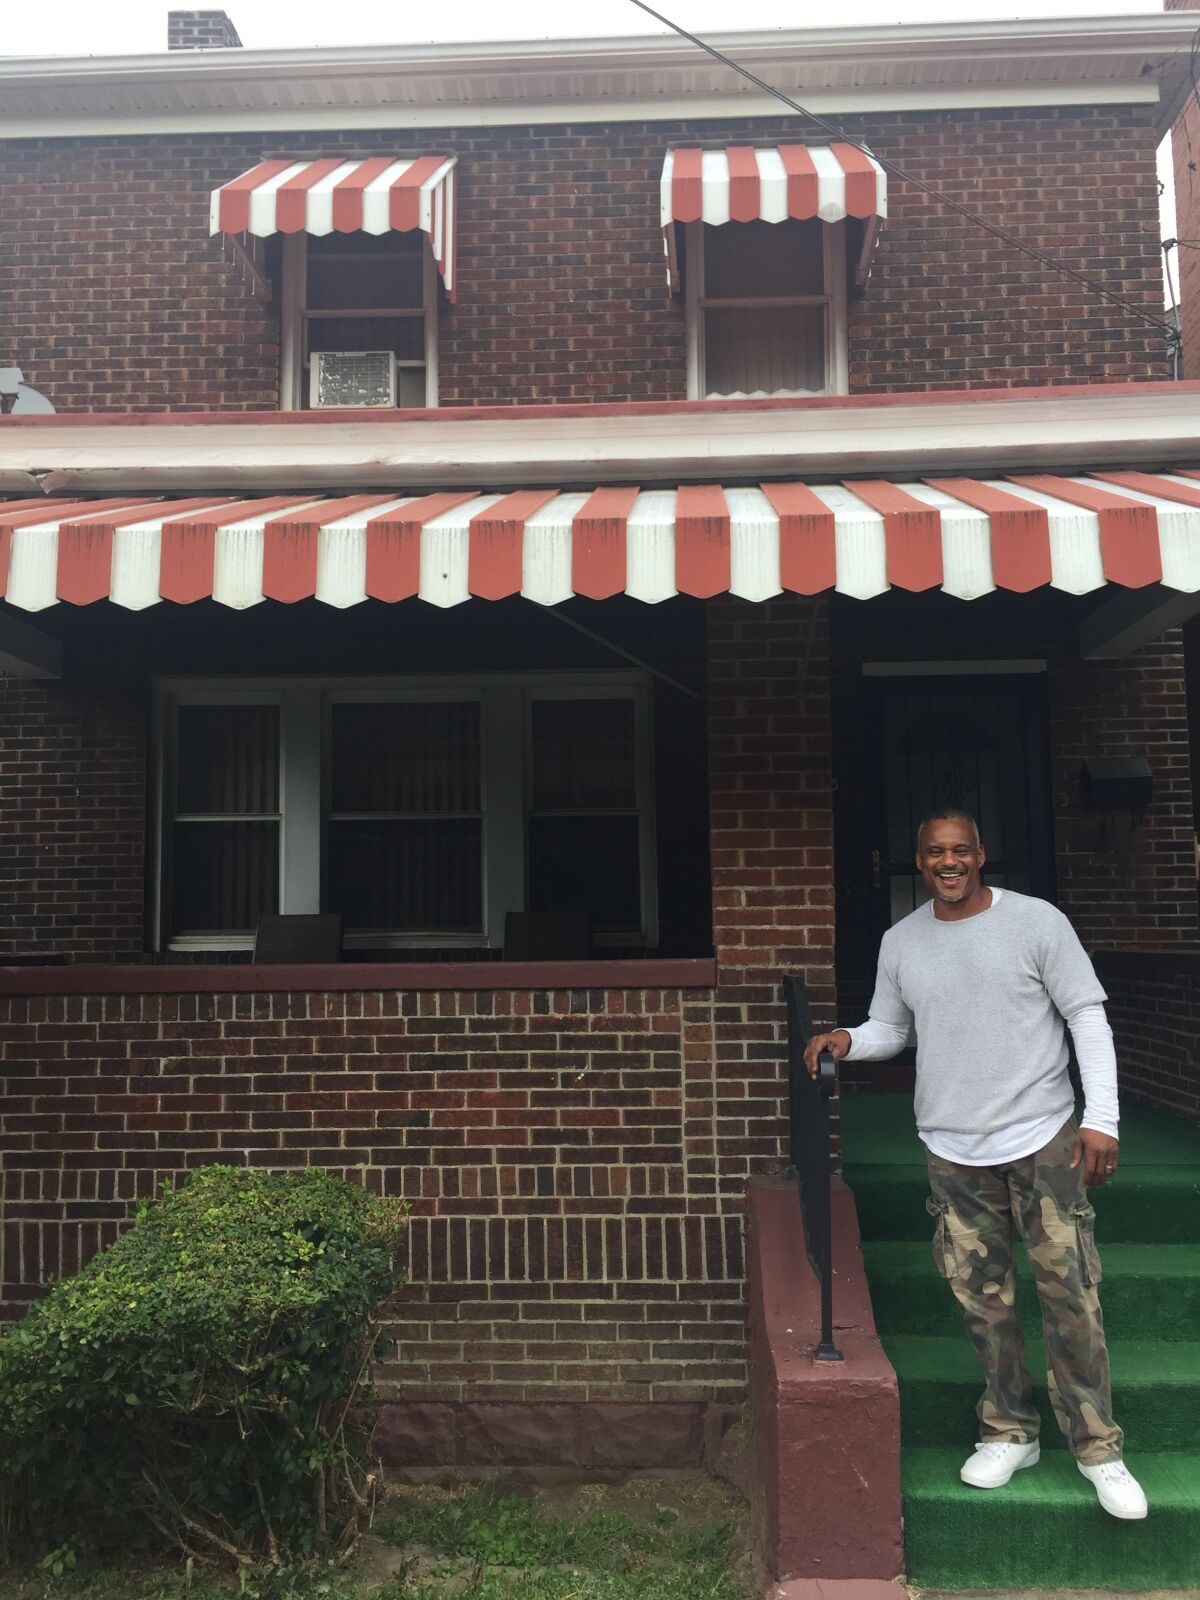 Archie Donald, father of Aaron Donald, stands on the porch of the Rams star's childhood home in Pittsburgh.